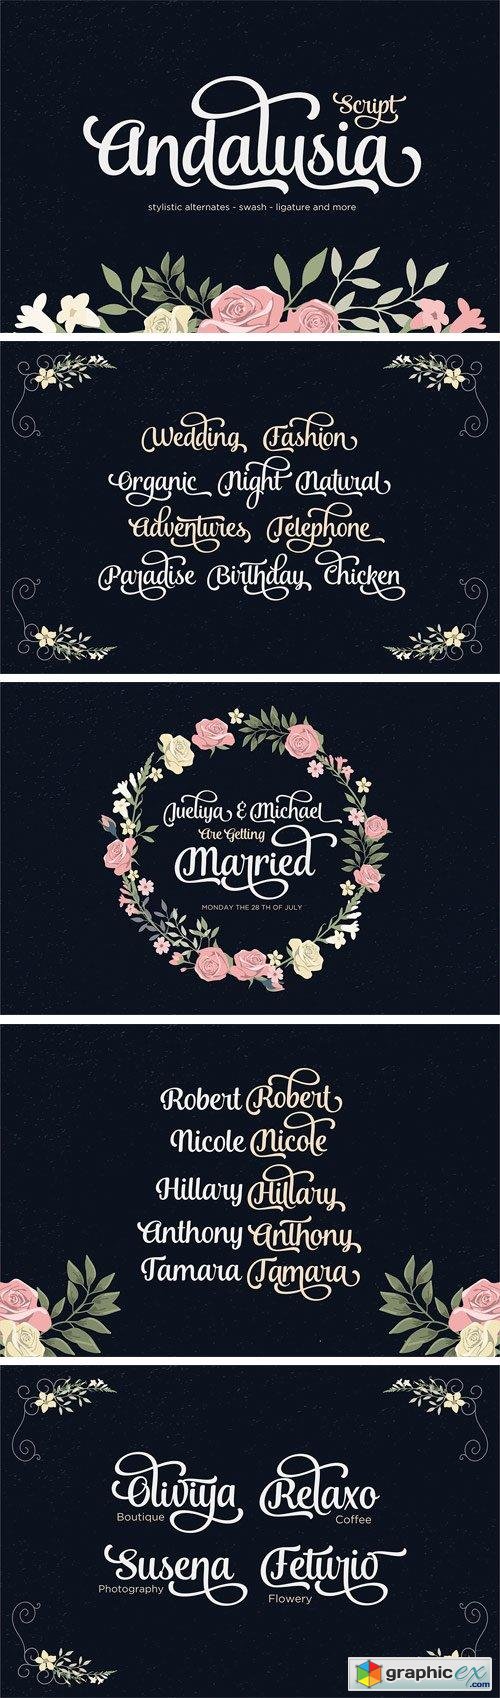 Andalusia Script Font for $20